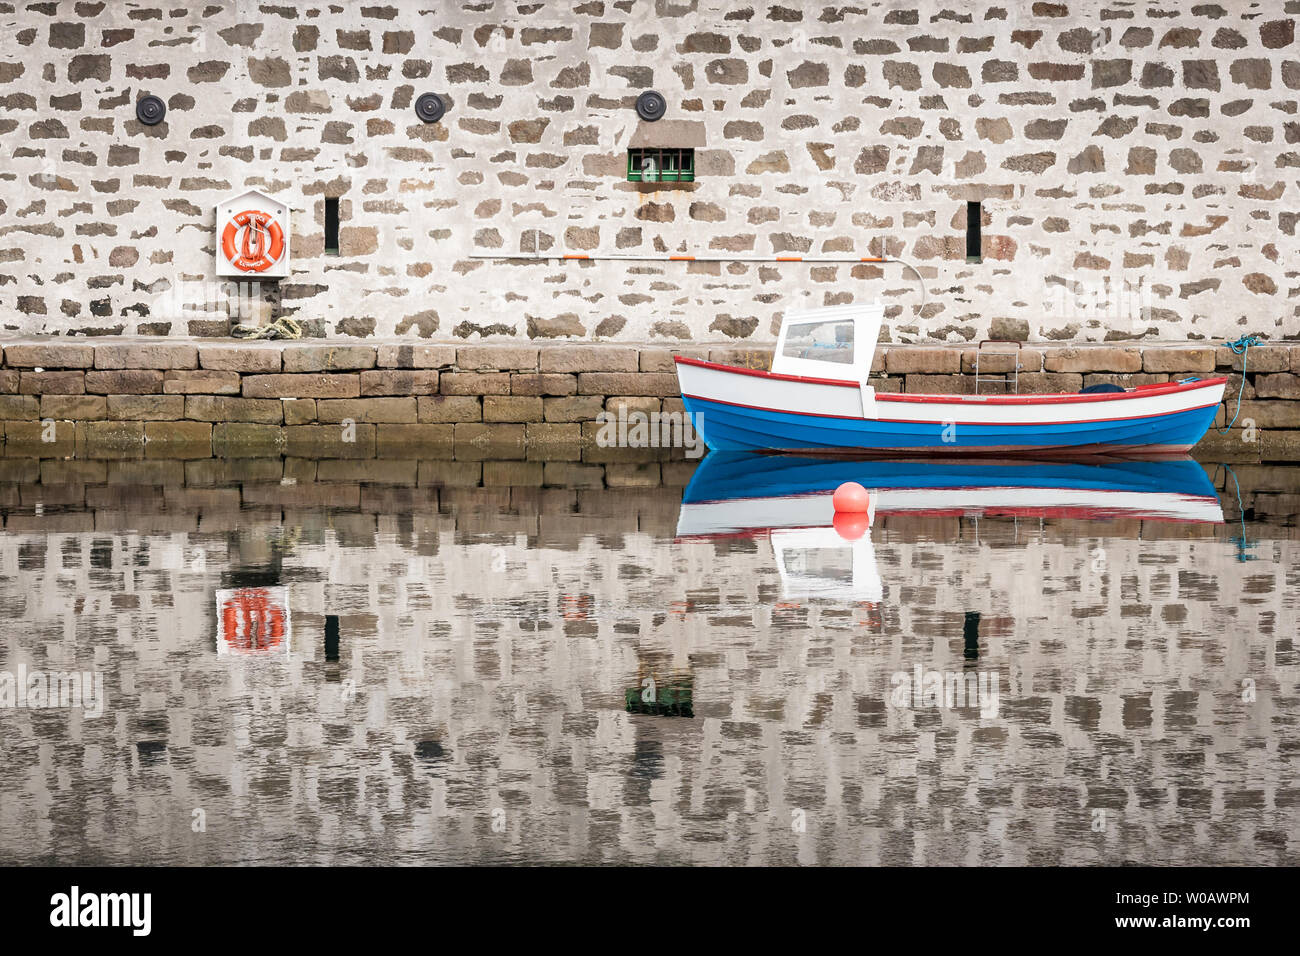 Boat reflections at Hay's Dock in Lerwick in the Shetland Isles, North of Scotland, UK. Stock Photo